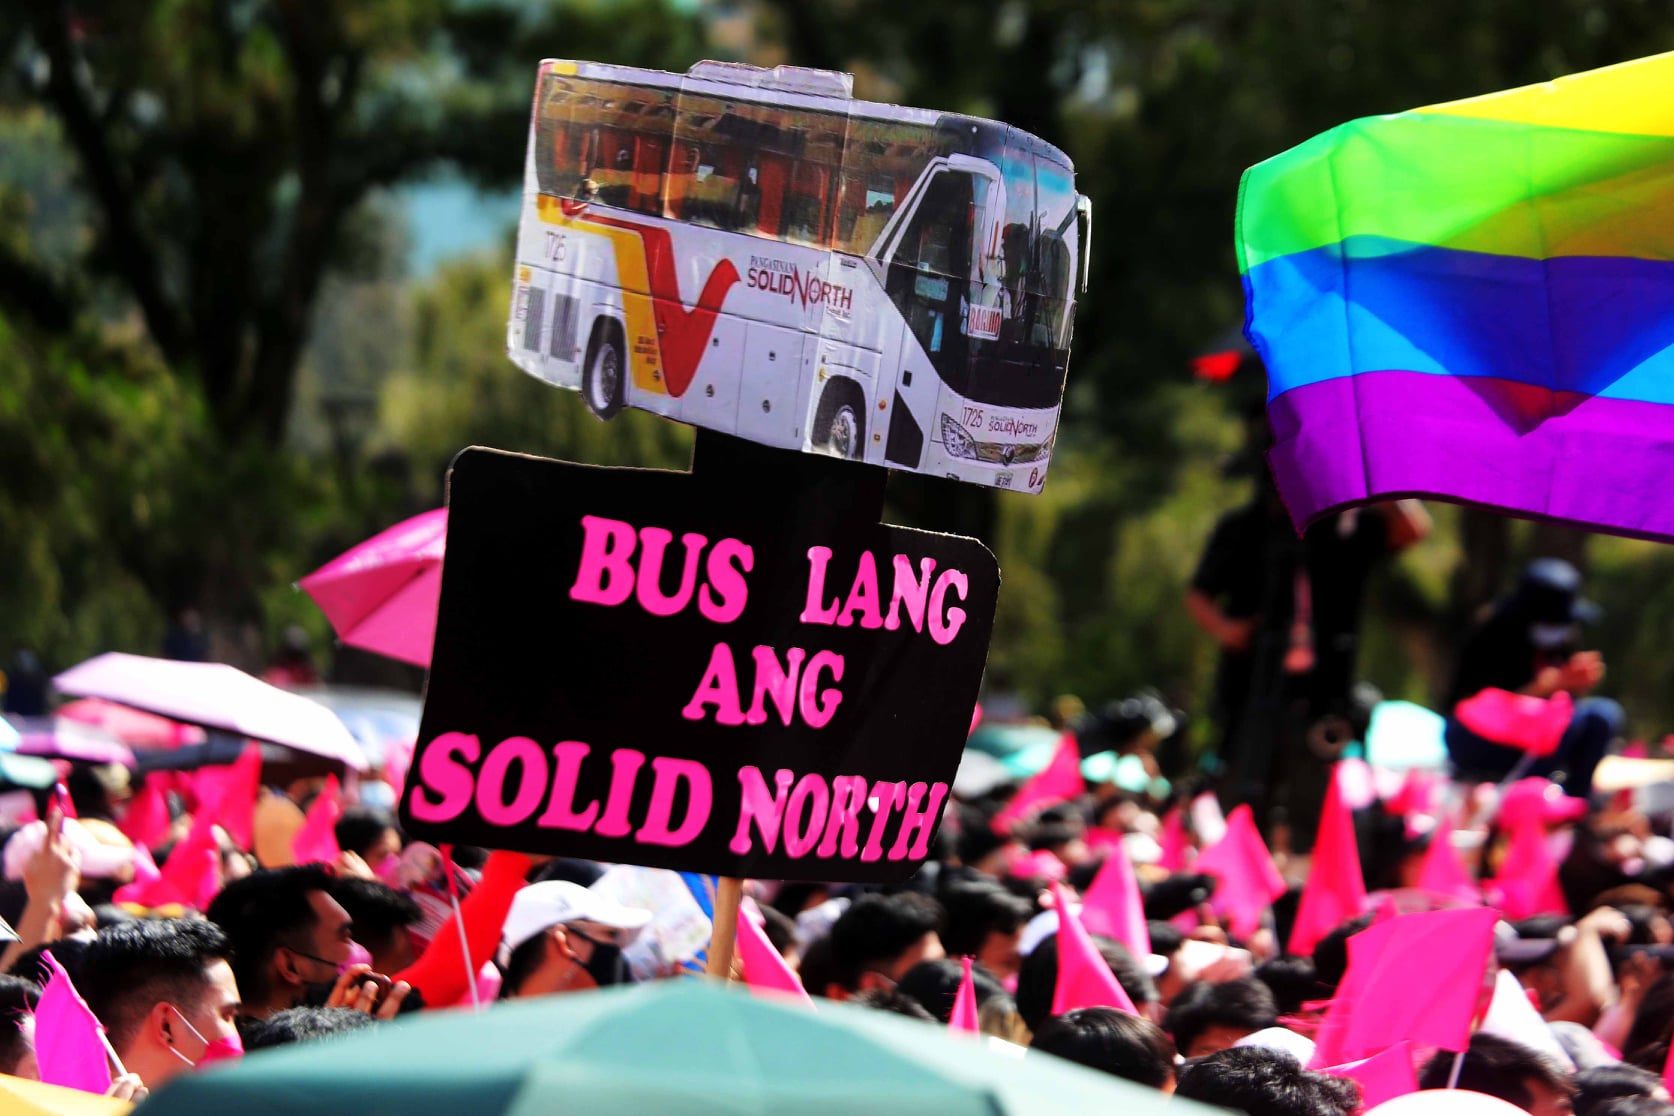 Solid North ‘bus’ zooms on as political juggernaut